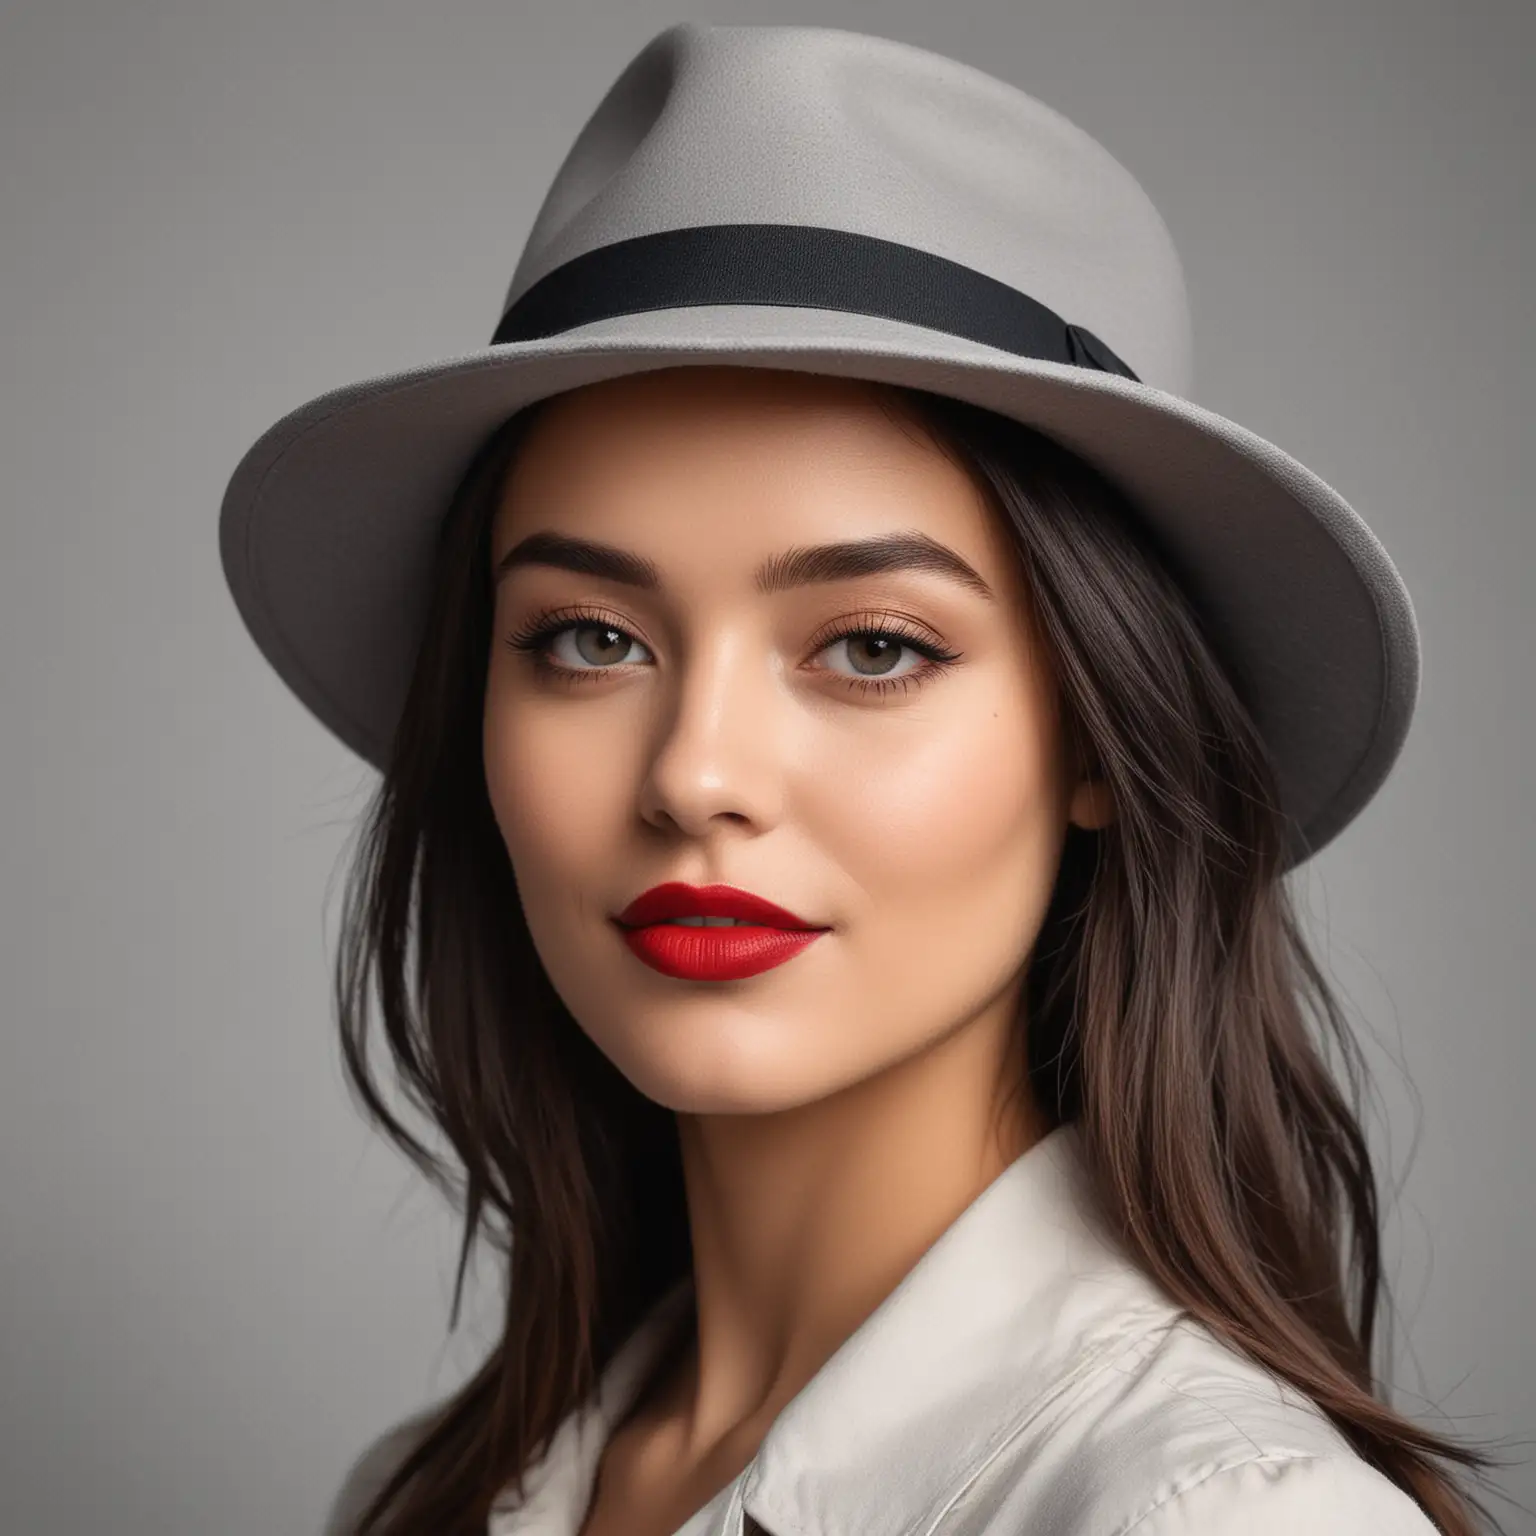 Create 9 photos for instagram campain of a photographer, beautiful women wearing a gray fedora, and primary color #fa4b0a